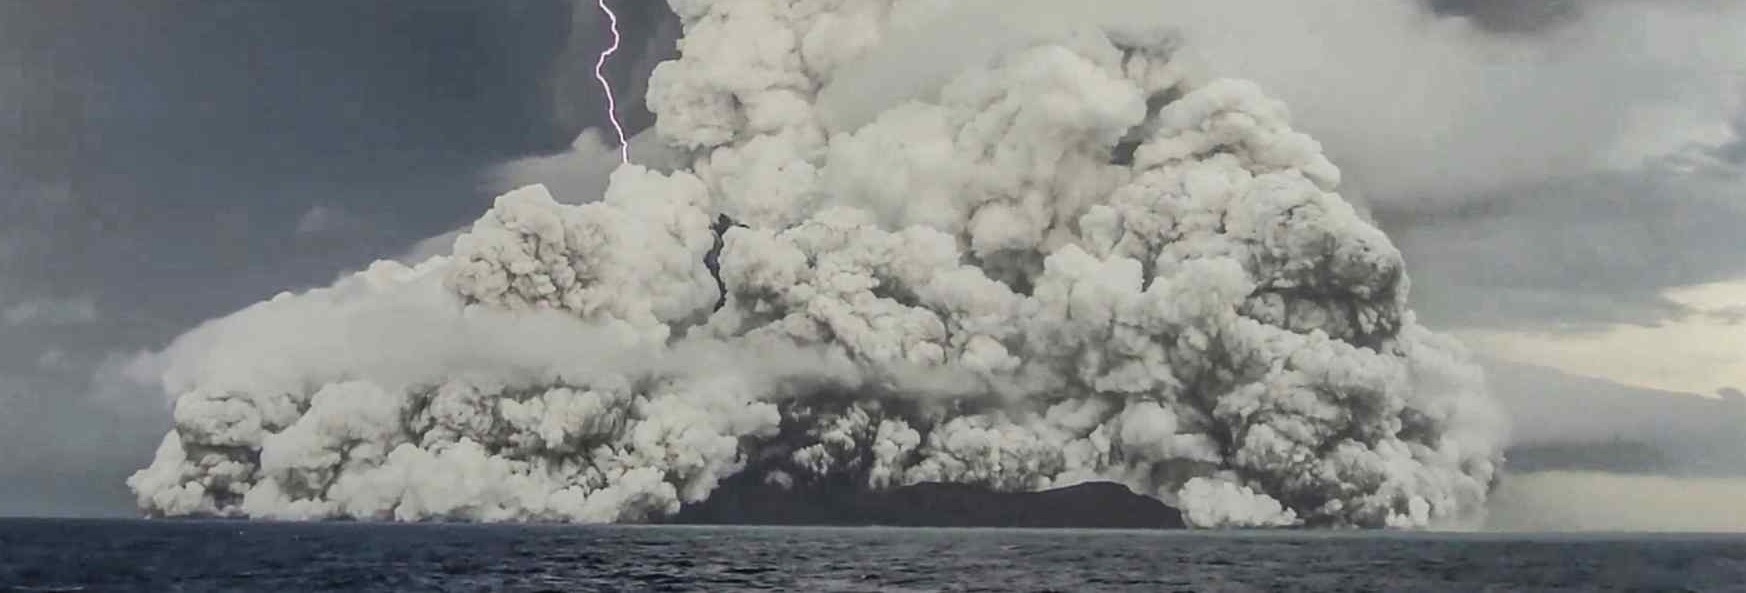 New research challenges assumptions of what triggered Hunga eruption – noaa.gov